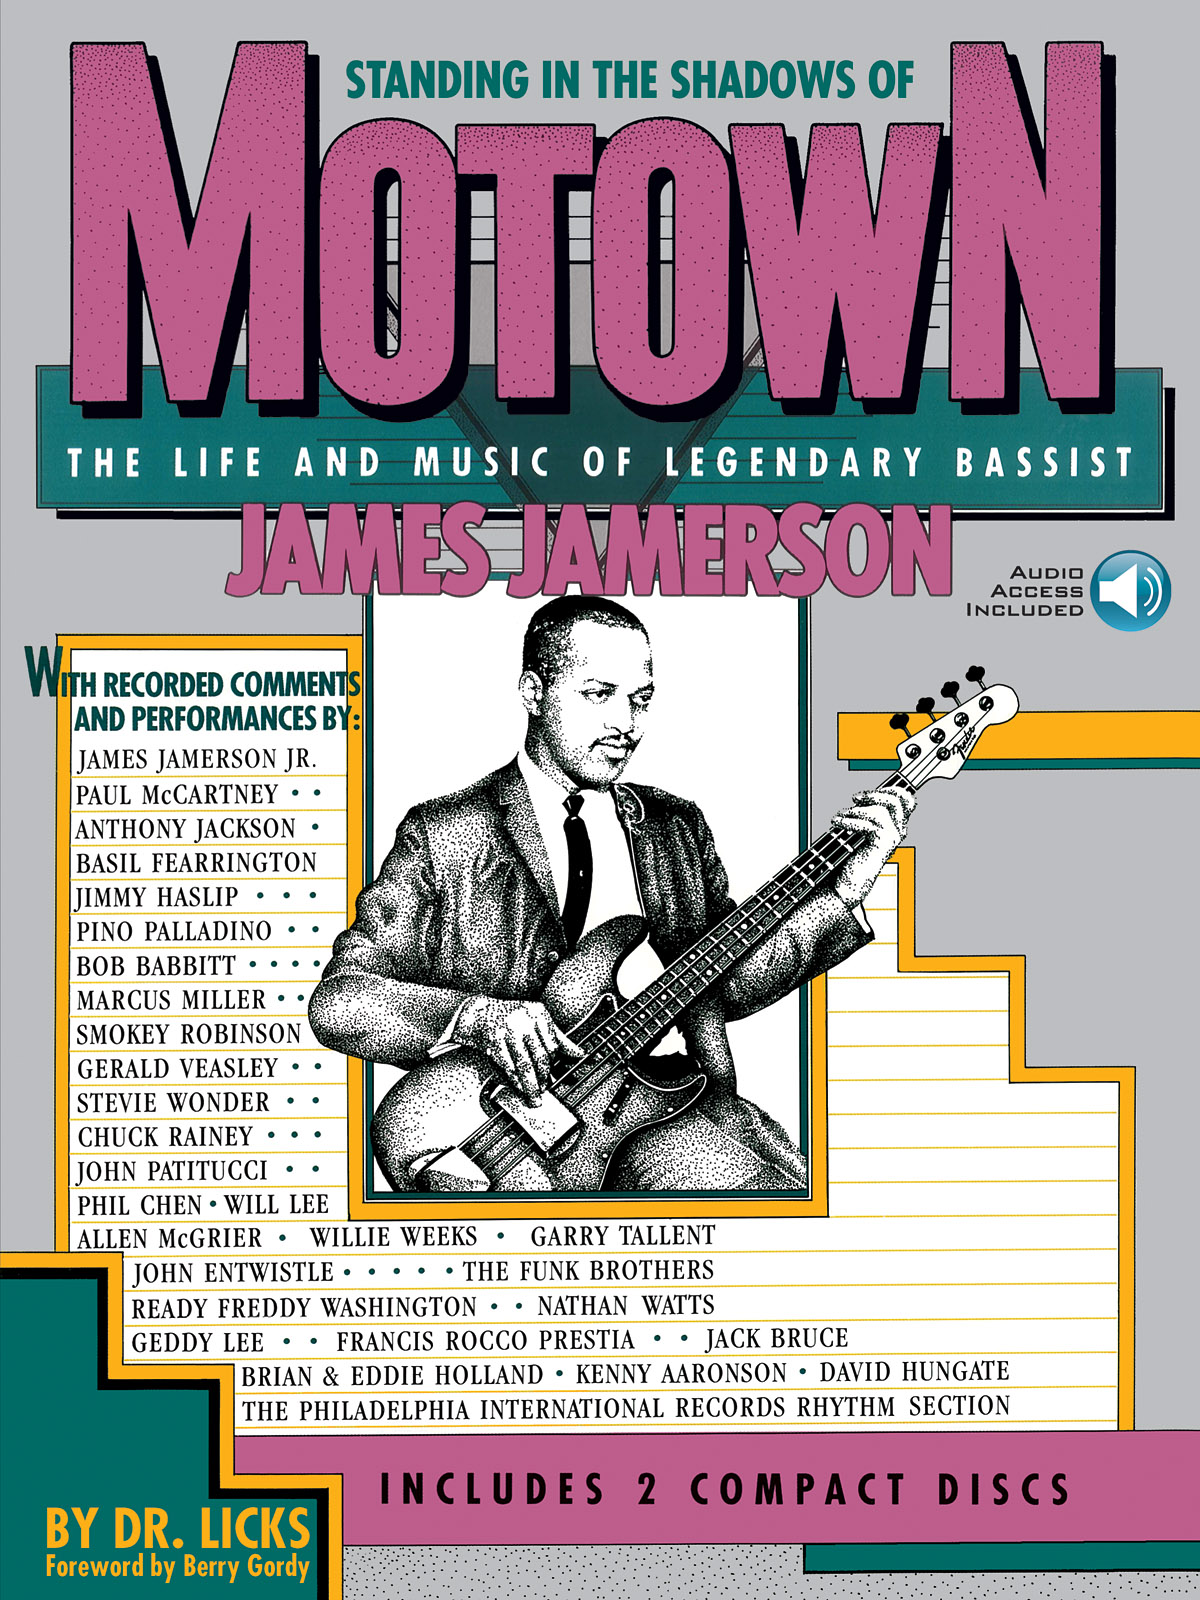 Allan Slutsky: Standing in the shadows of Motown: Reference